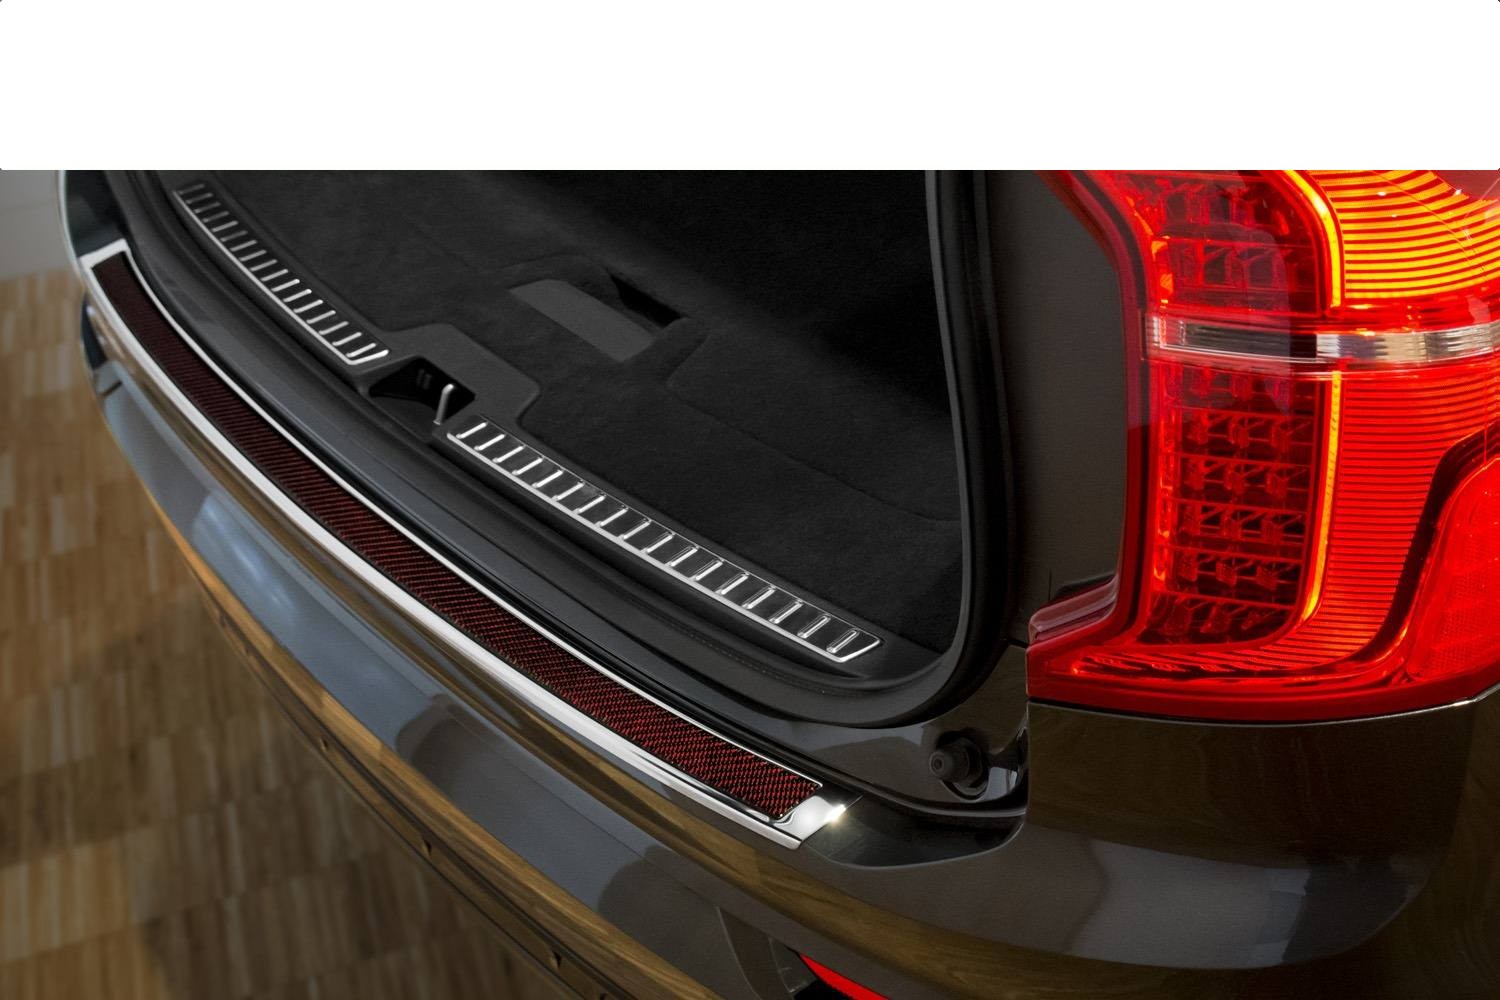 https://www.carparts-expert.com/images/stories/virtuemart/product/TMP-vol7x9bp-volvo-xc90-ii-2015-rear-bumper-protector-high-gloss-stainless-steel-carbon-1.jpg